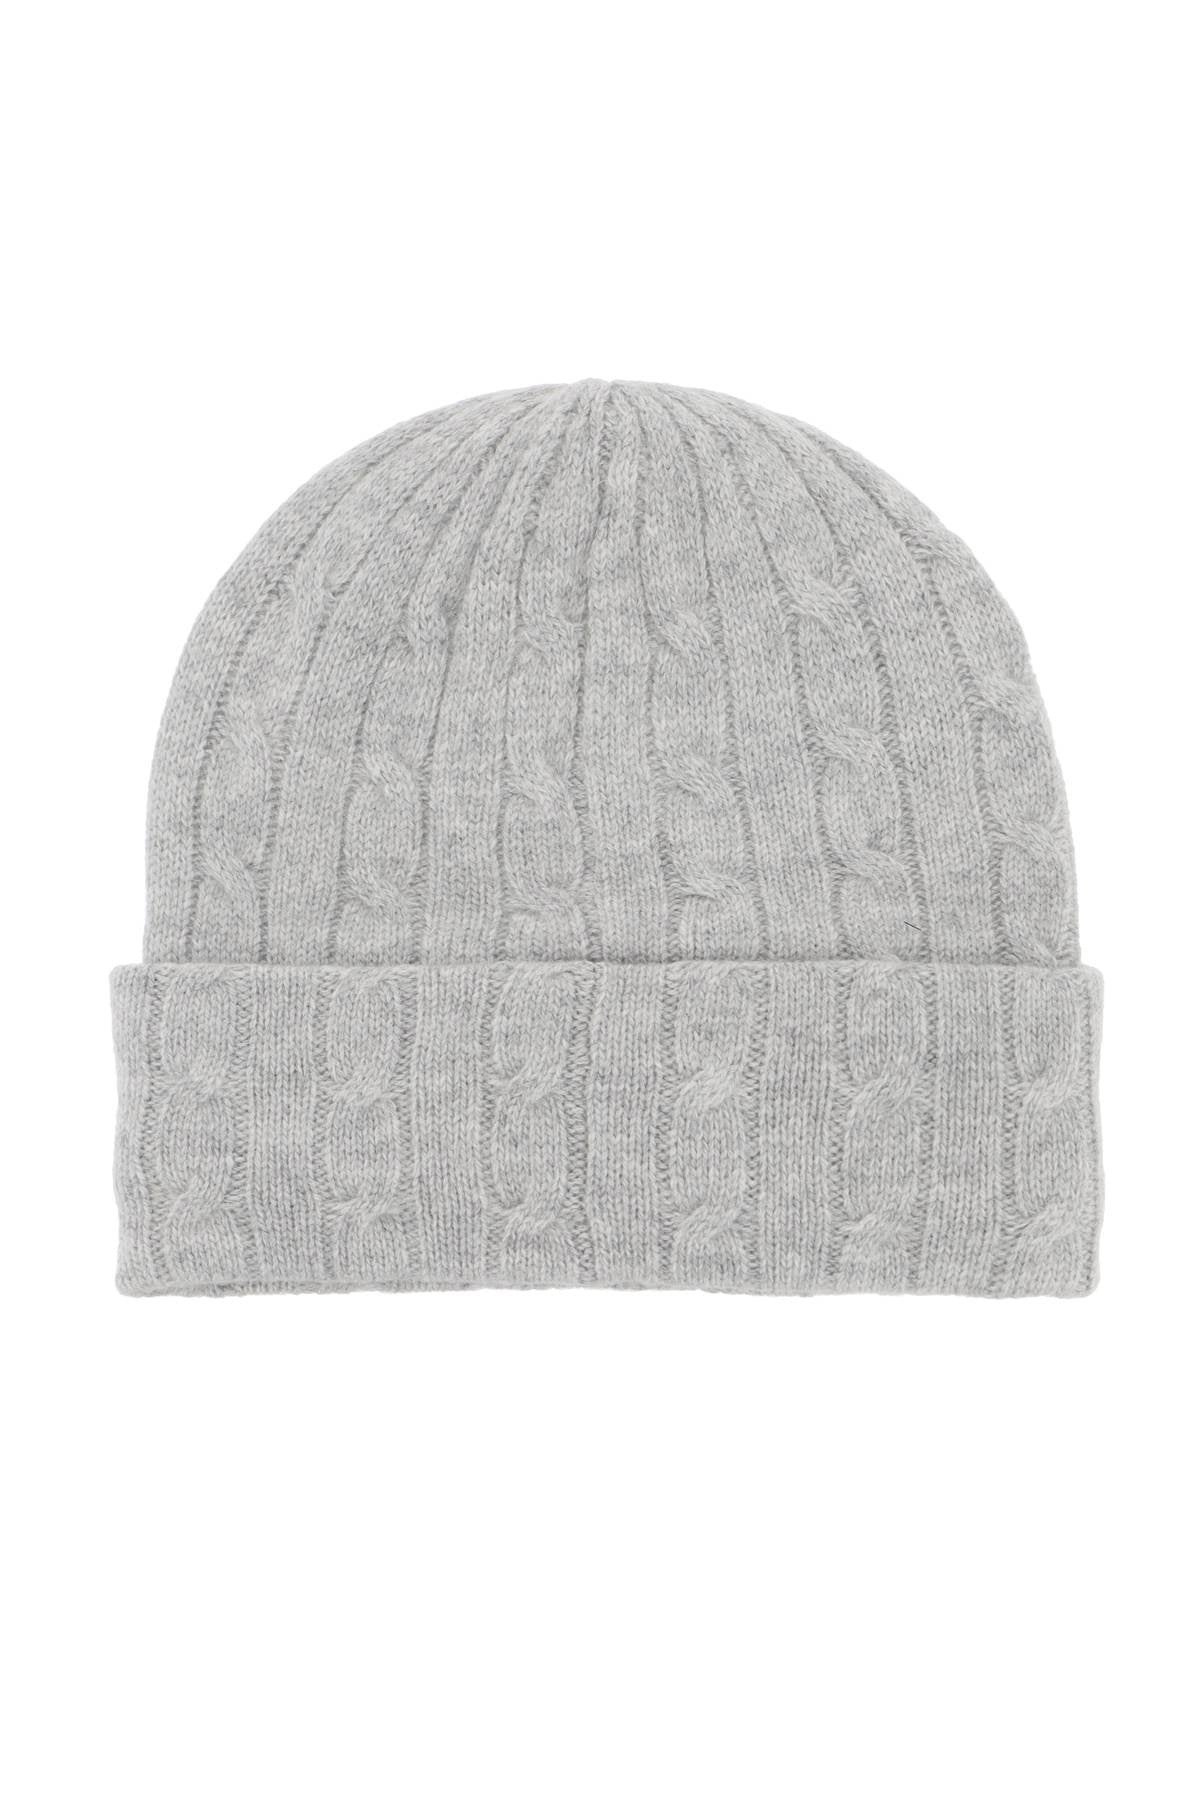 Polo Ralph Lauren Polo ralph lauren cable-knit cashmere and wool beanie hat